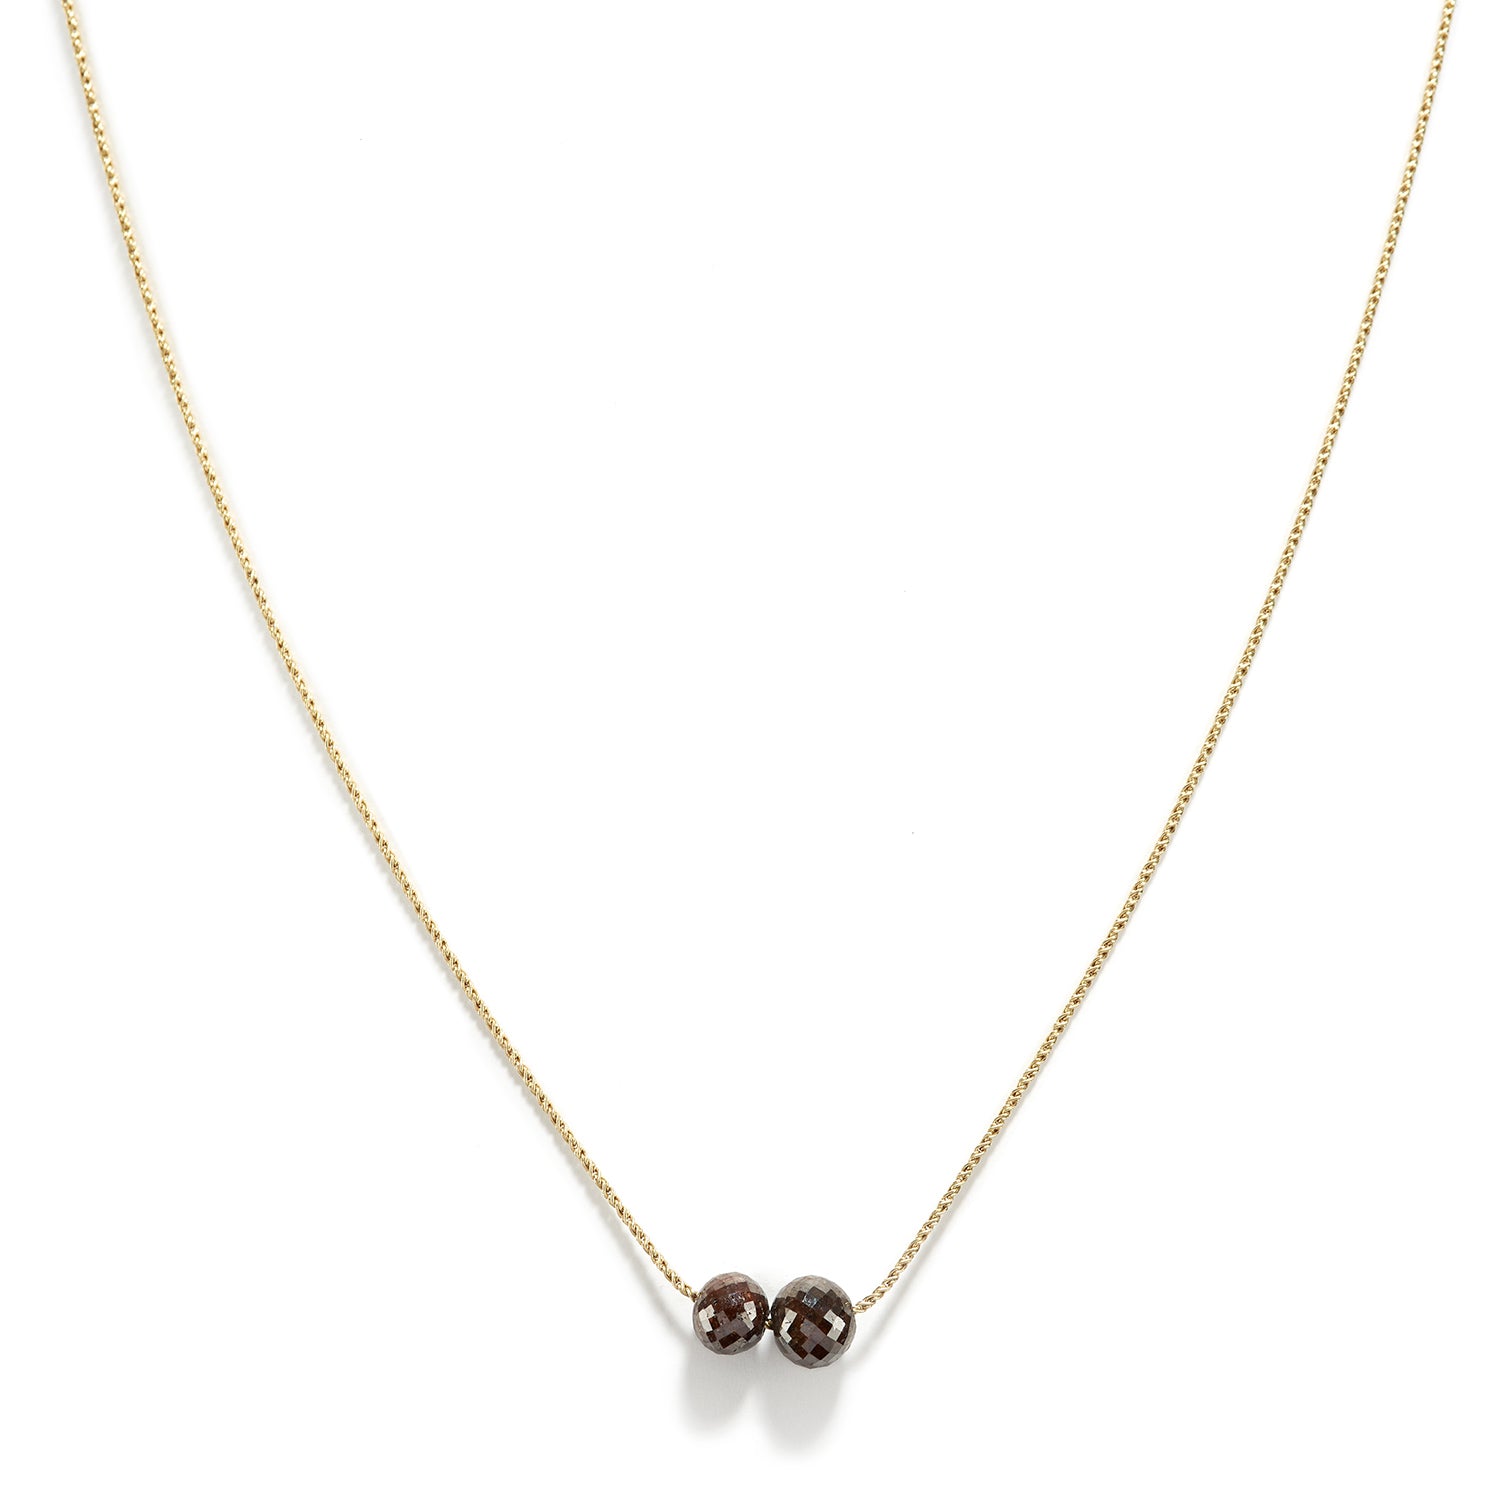 Rustic Brown Double Diamond Necklace